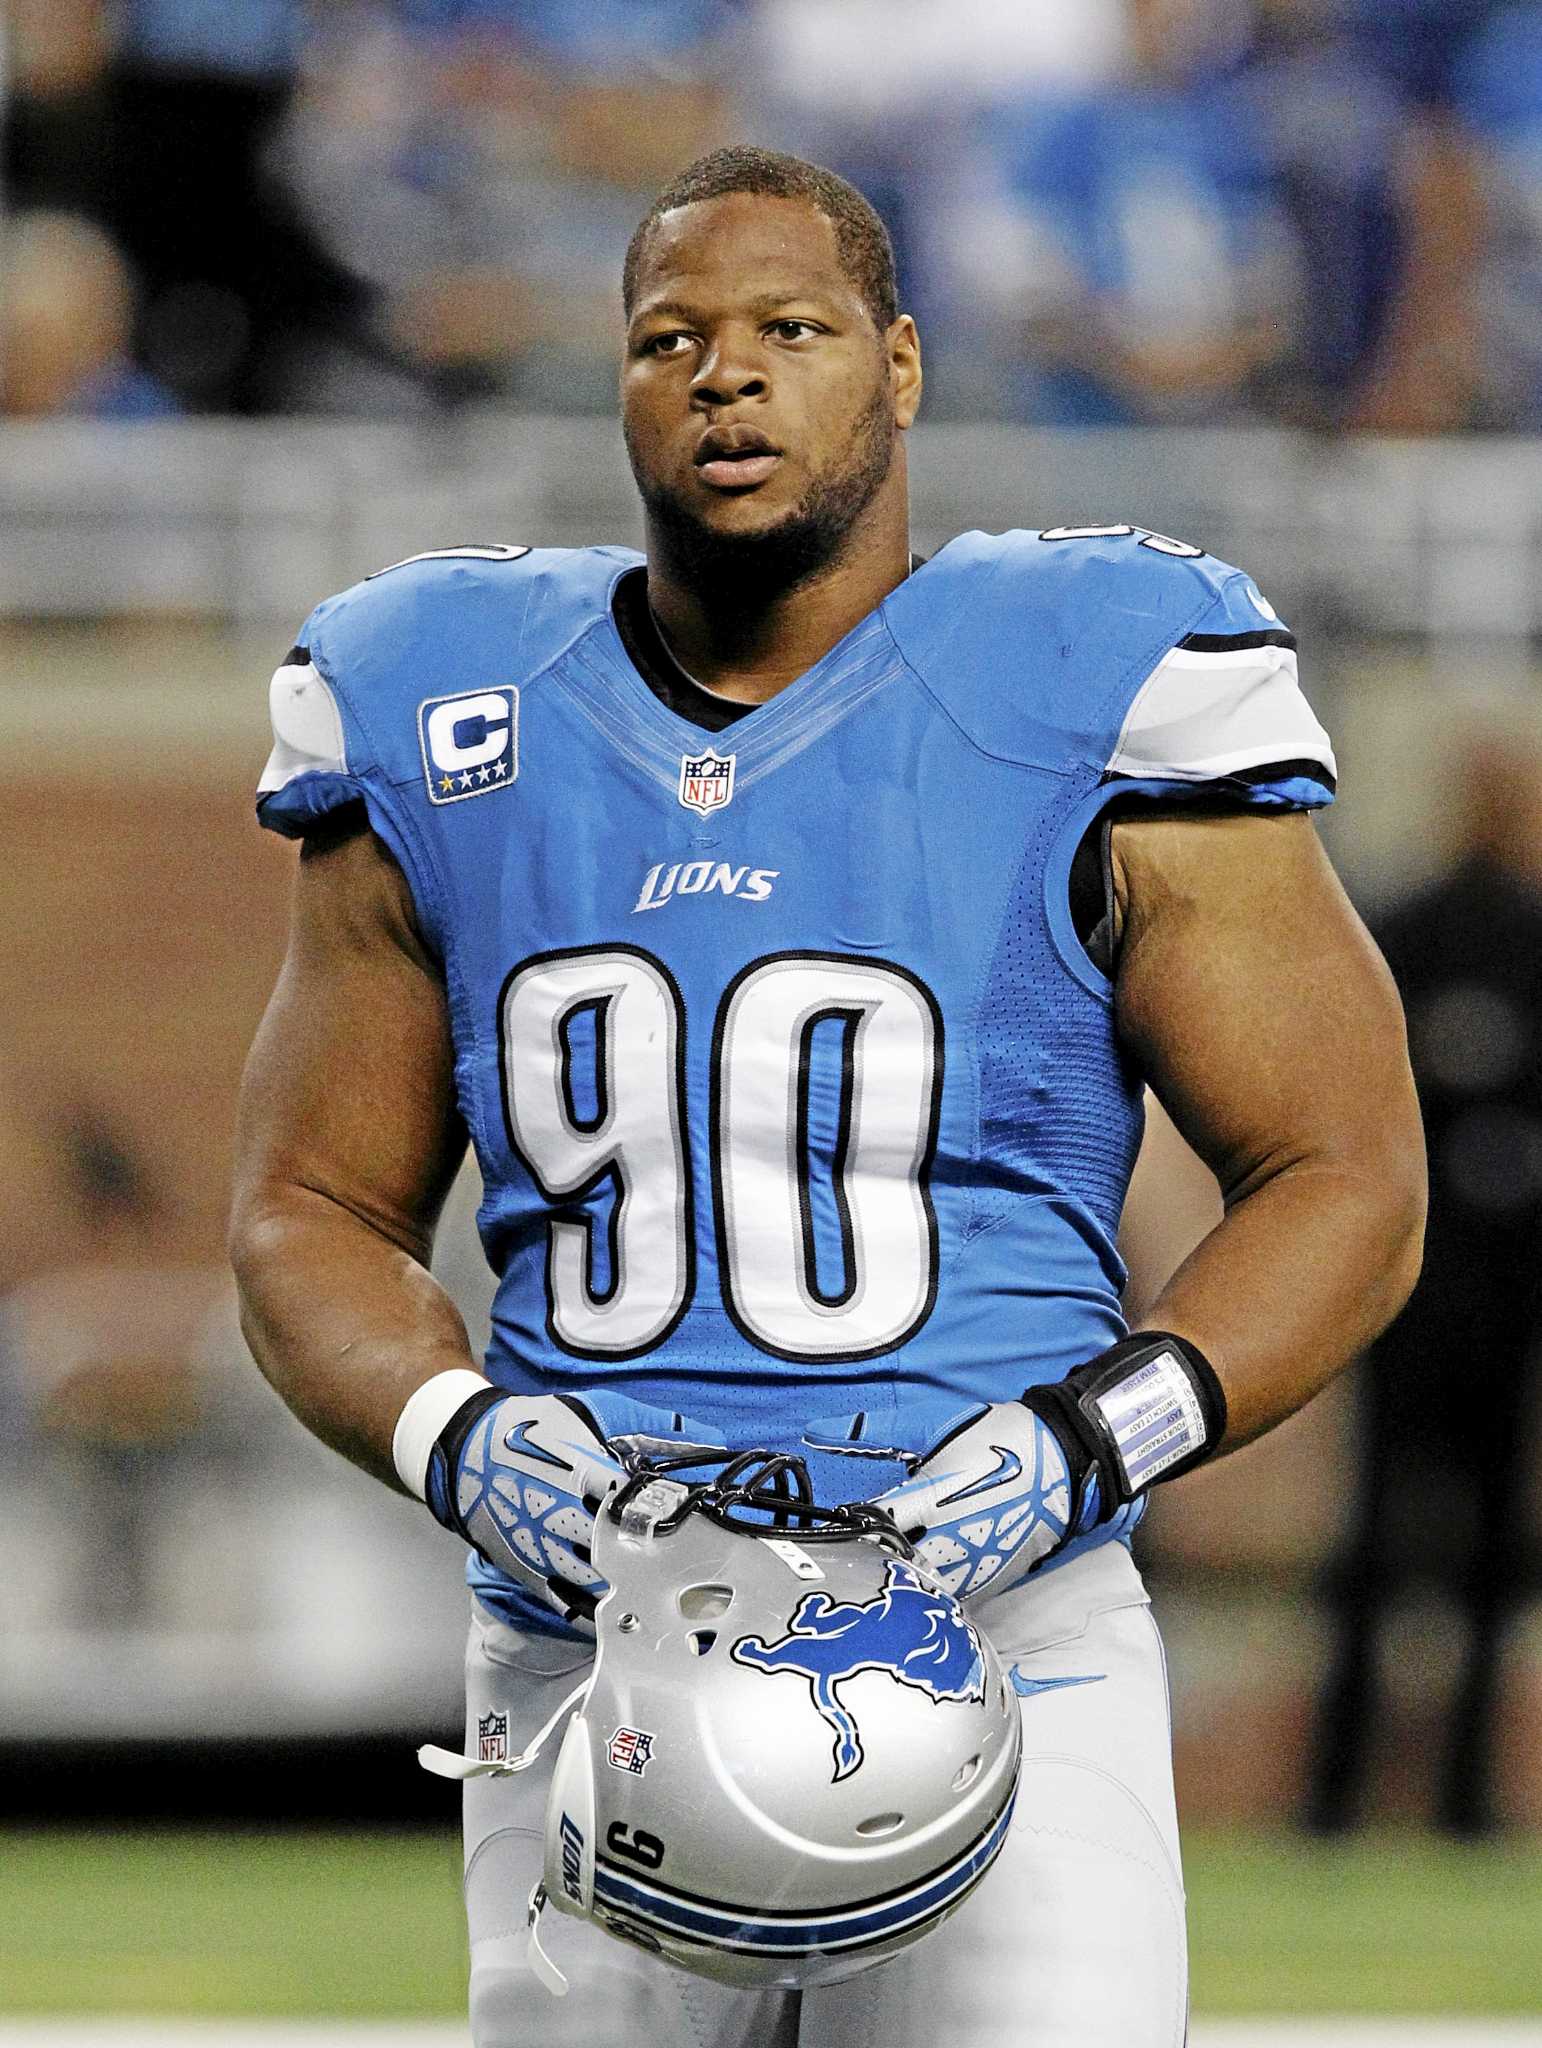 Suh slapped with $100K fine for illegal block